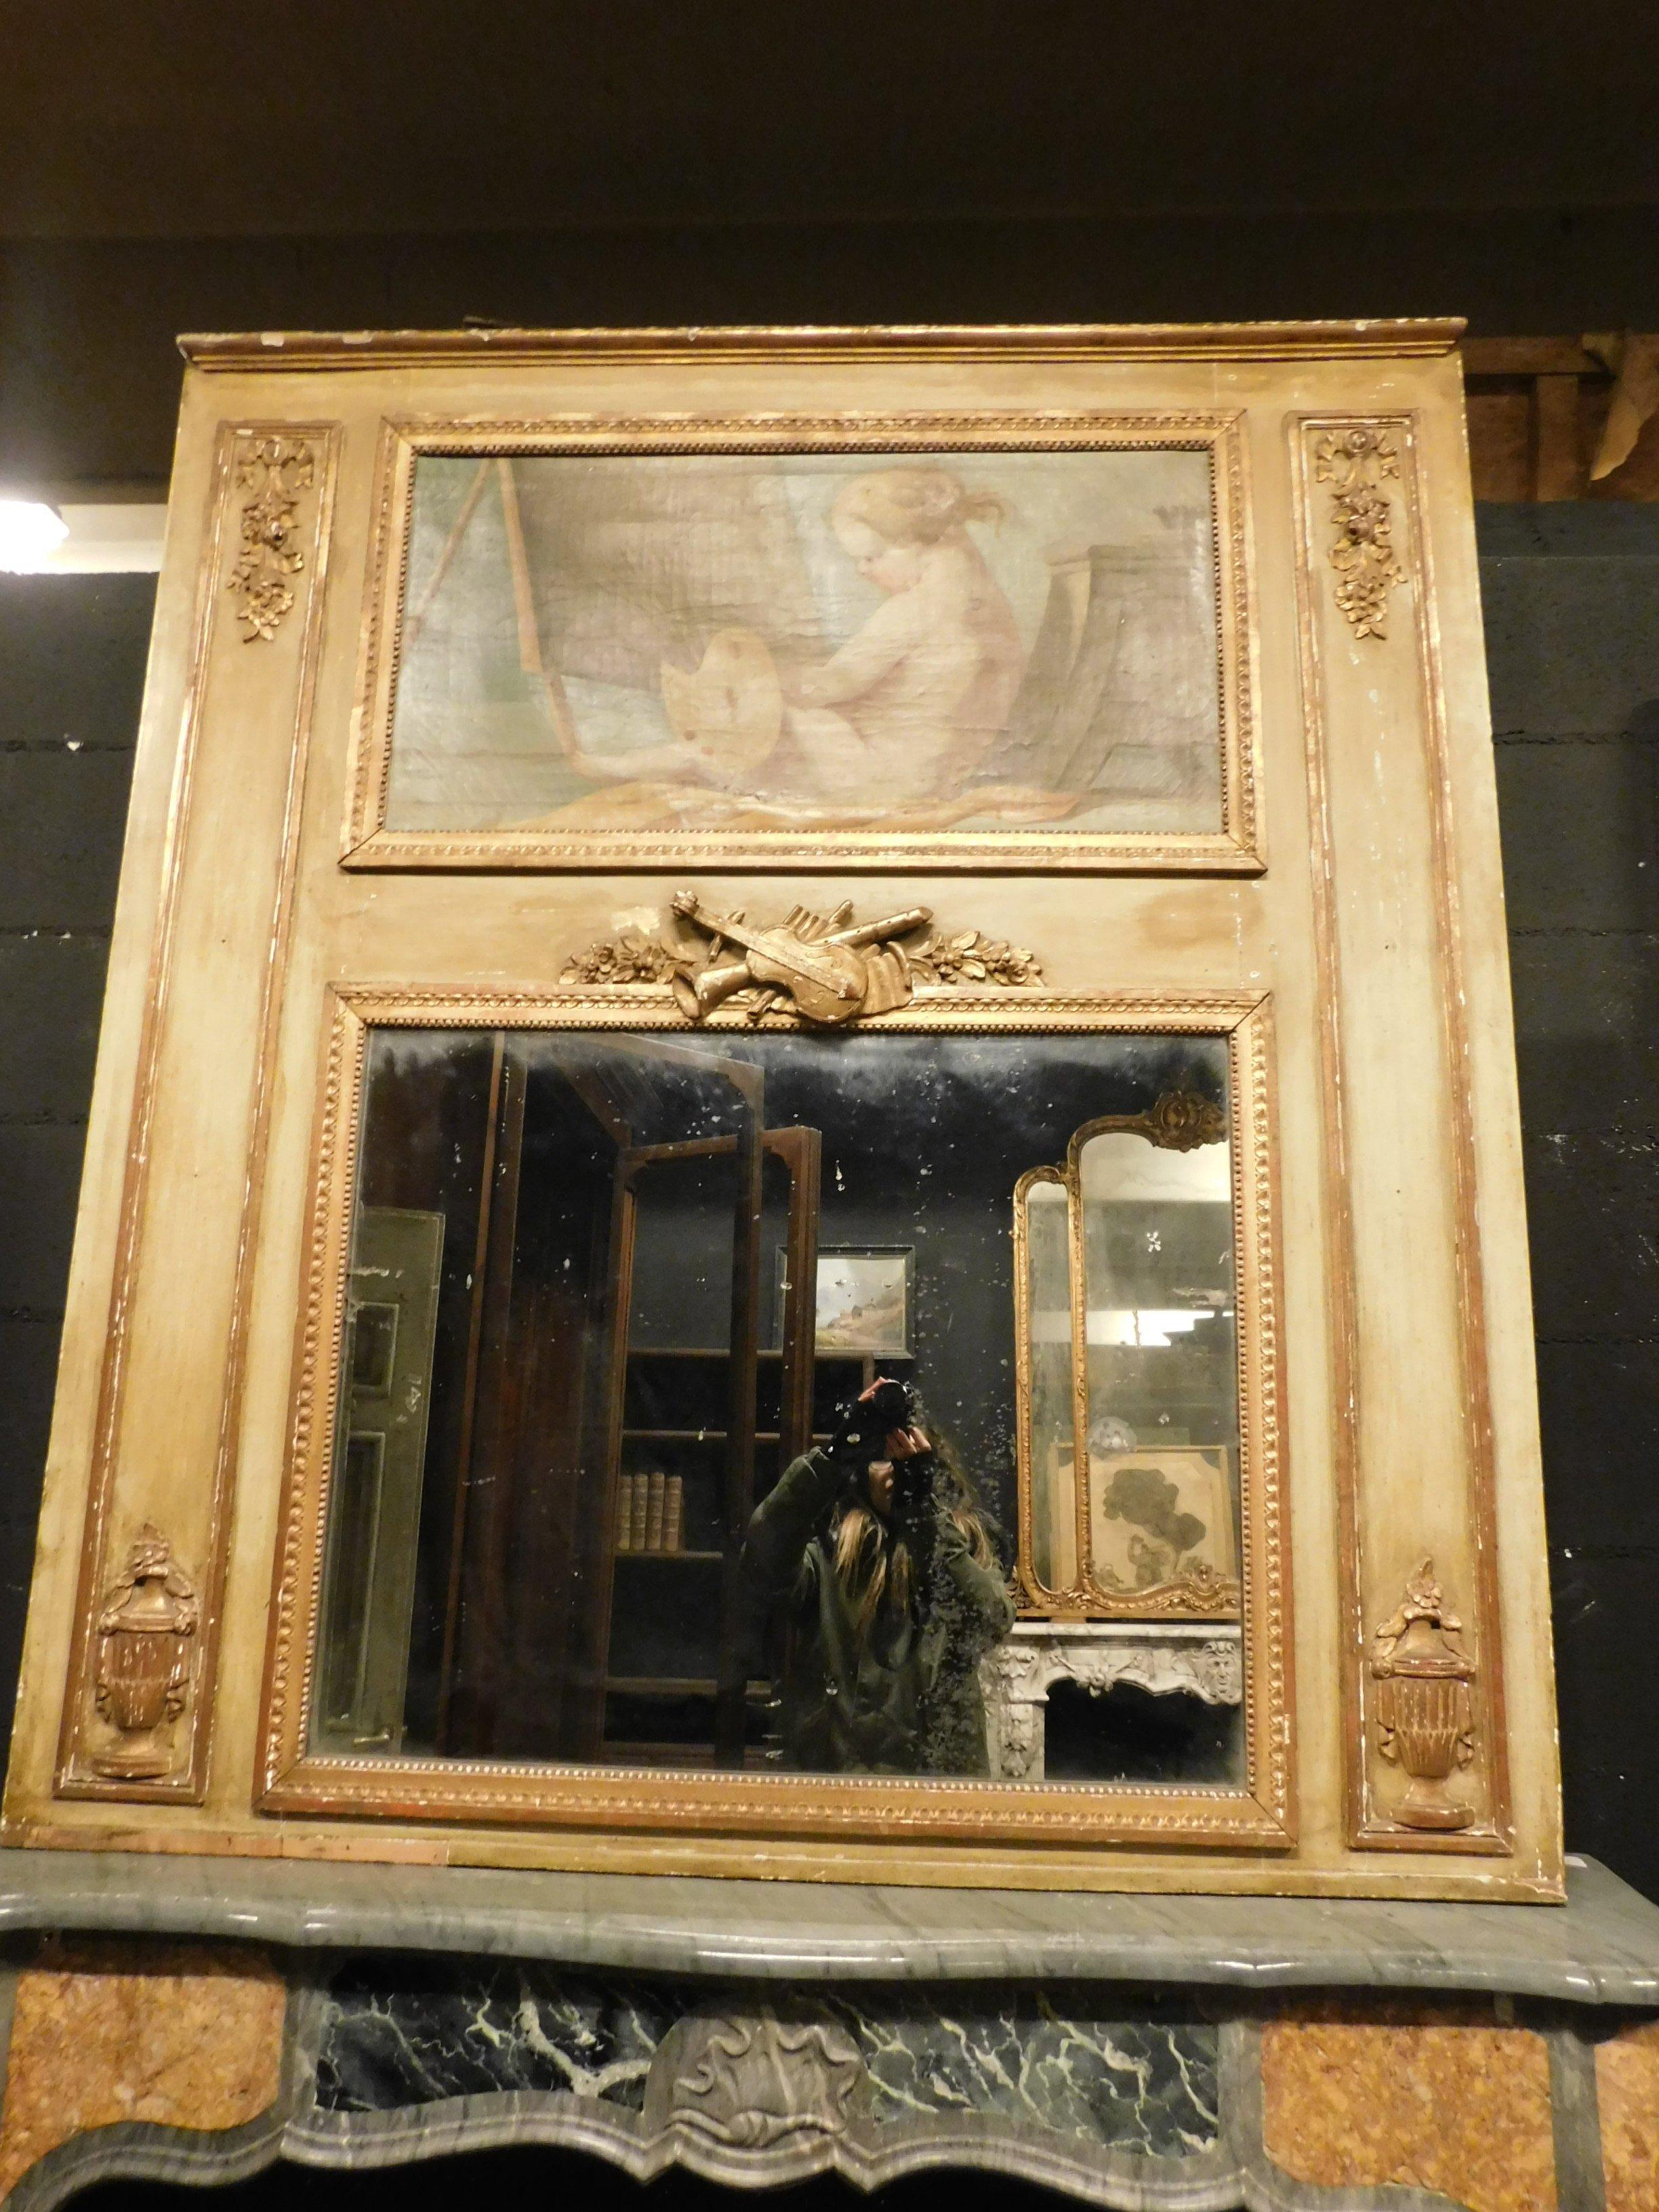 Ancient gilded and lacquered mirror with ocher yellow earth colors, original Louis XVI style with painting above, an entire mirror dedicated to art, in fact it has music in the decorations carved on the frame and the painting depicts a goddess who